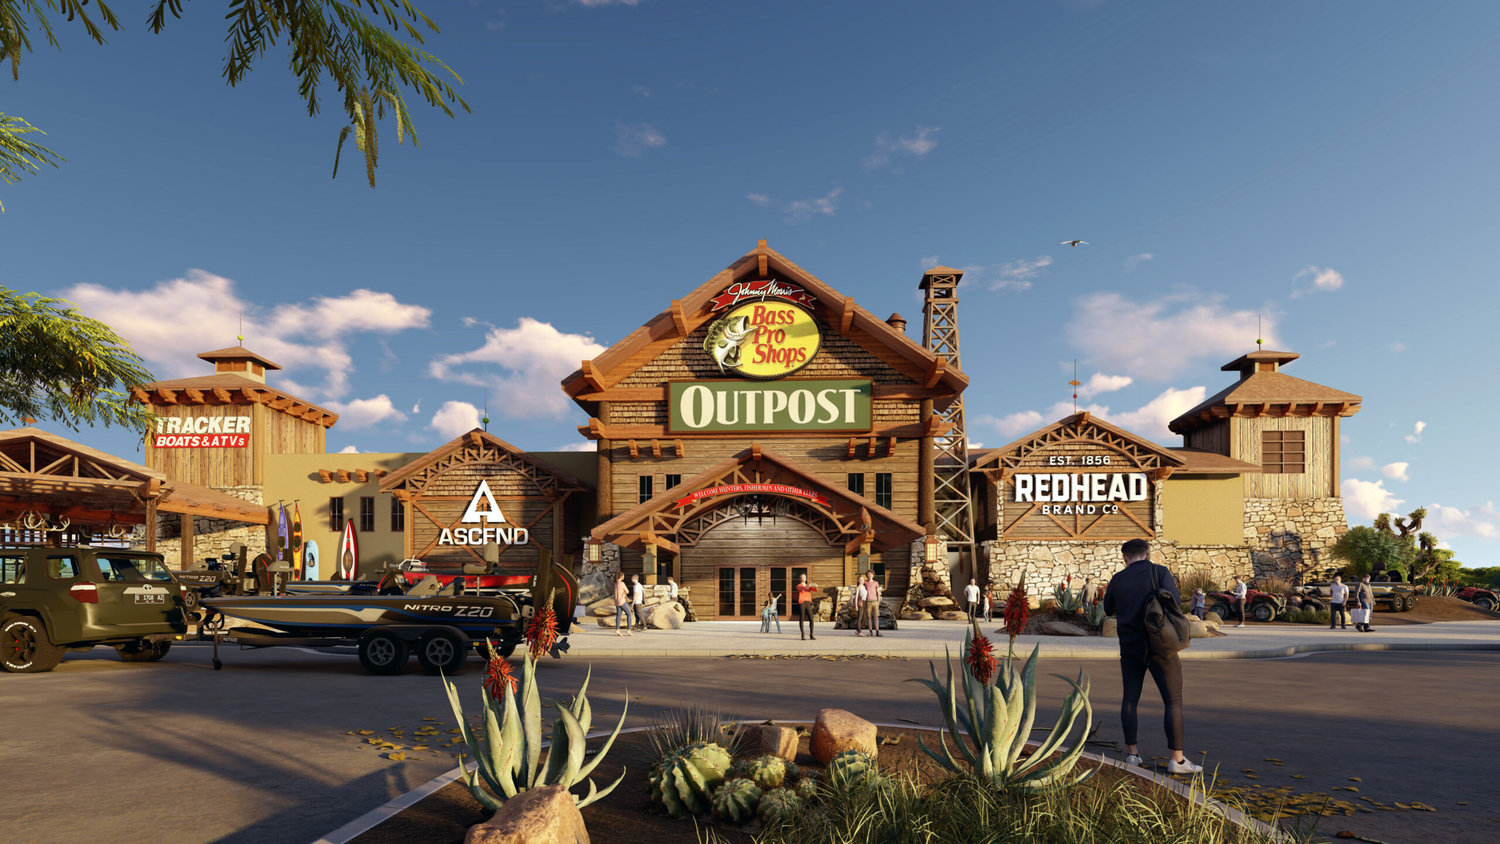 Bass Pro Shops' planned Outpost store in Midland, Texas, is expected to open in late 2024.